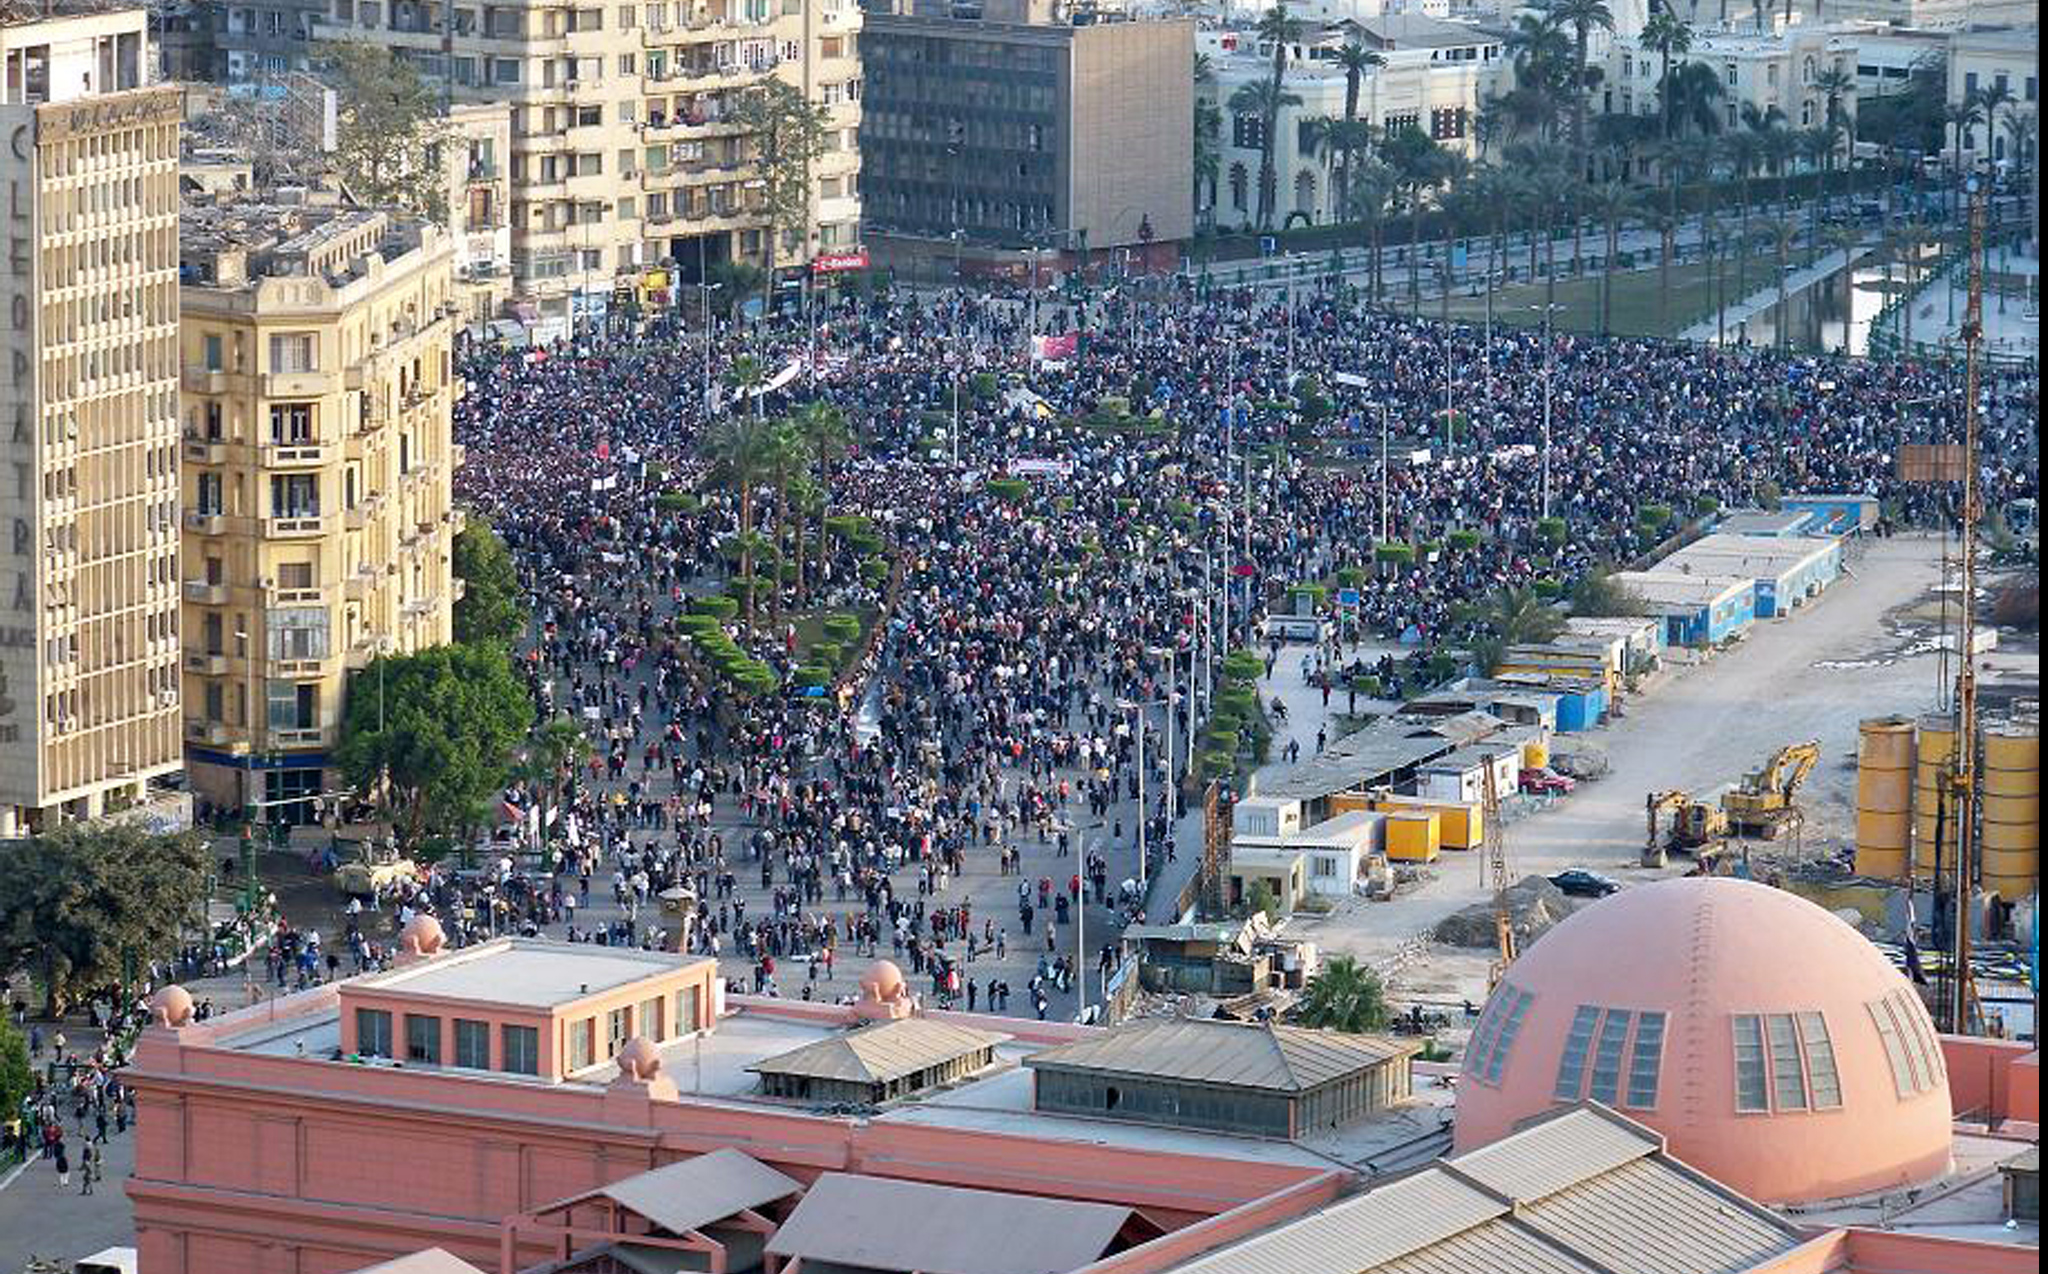 On February 1st, a massive demonstration was organised to protest against the regime, with the slogan ‘The people want the fall of the Rais <br>[President Hosni Mubarak]’. Nearly one million protesters flooded Tahrir Square, according to estimates by organisers. (Photo credit: Adel Gastel)